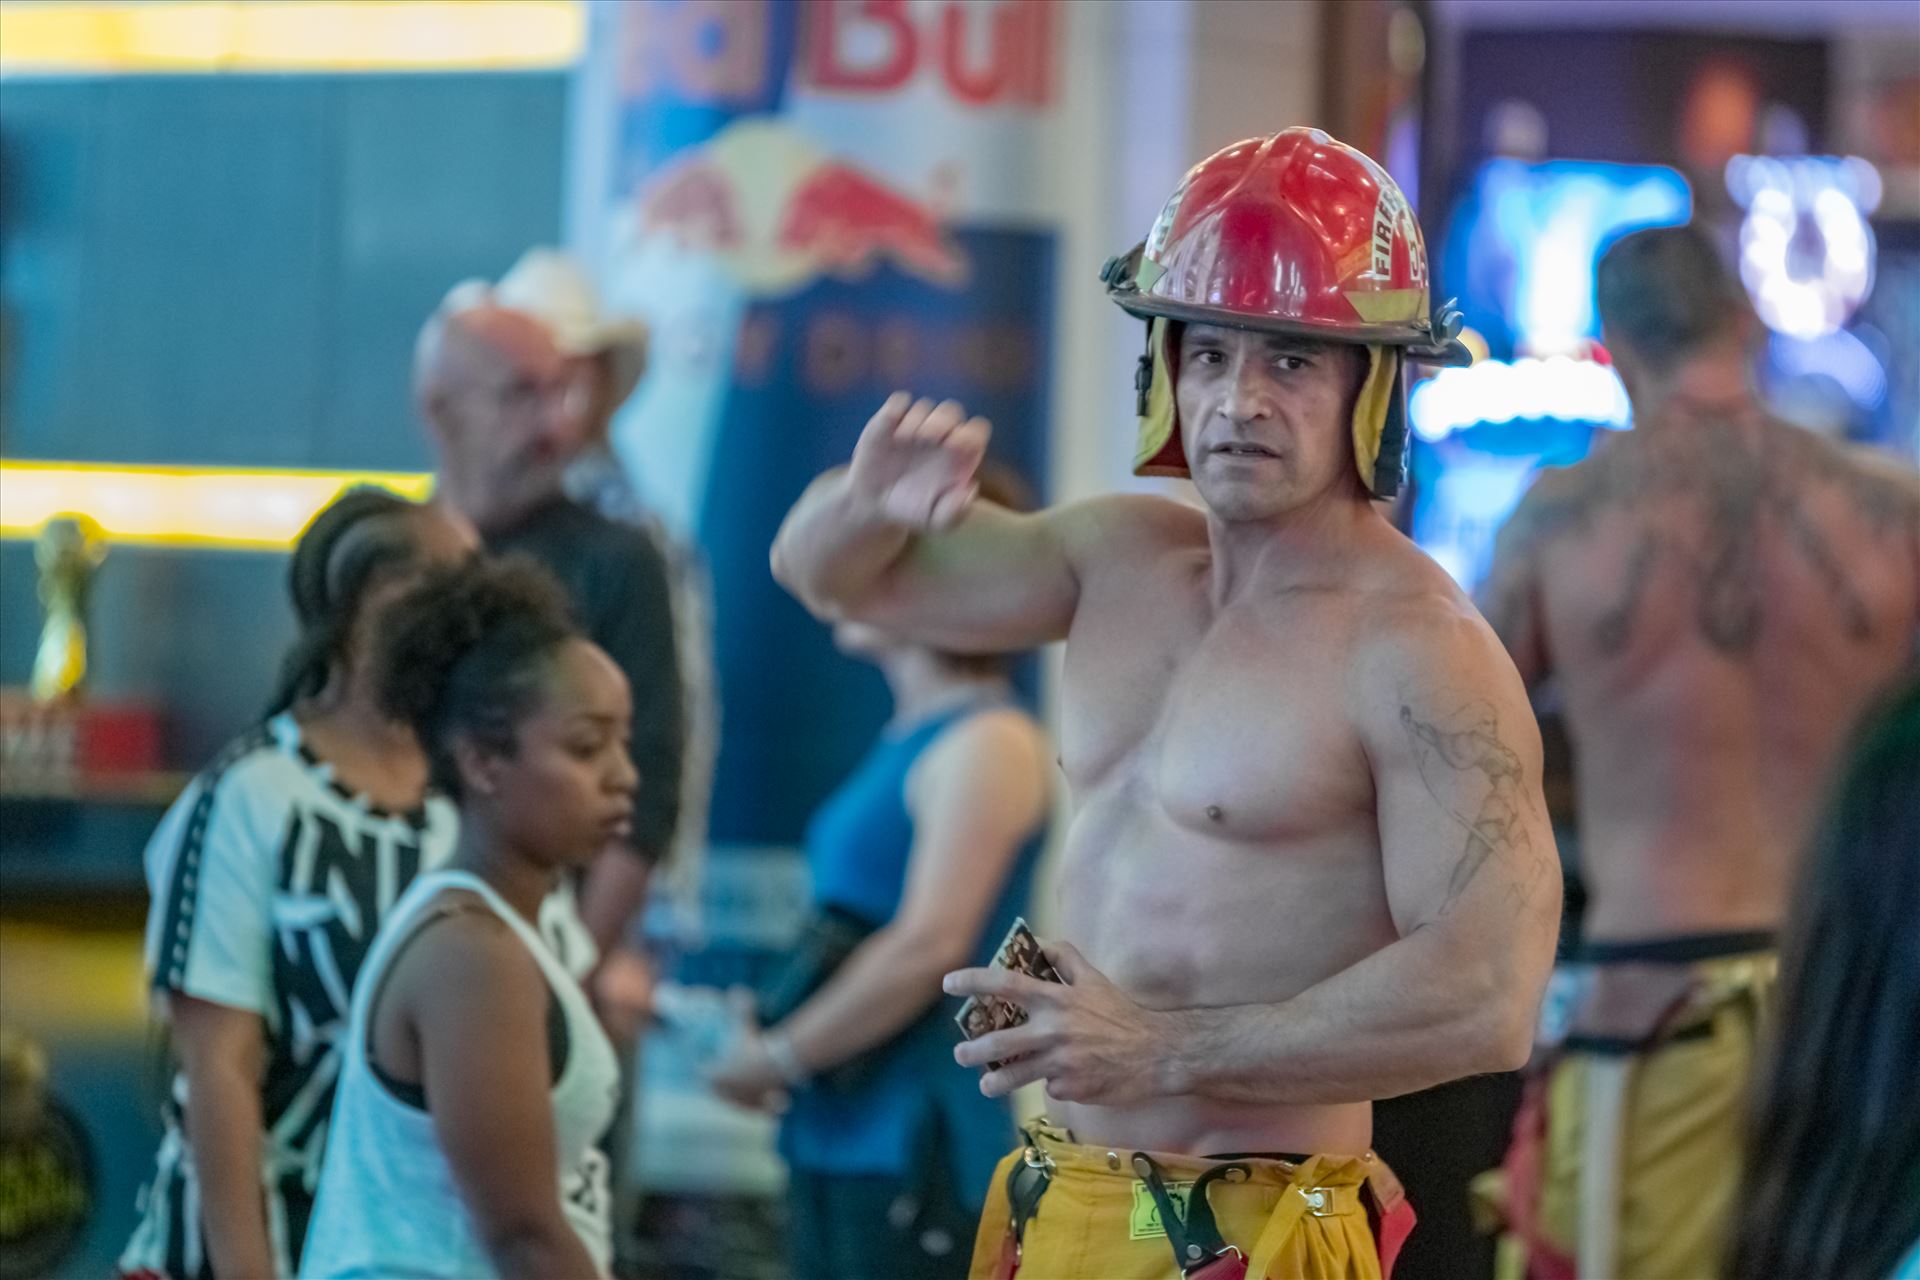 Fremont Street Experence firefighters-8502659.jpg -  by Terry Kelly Photography